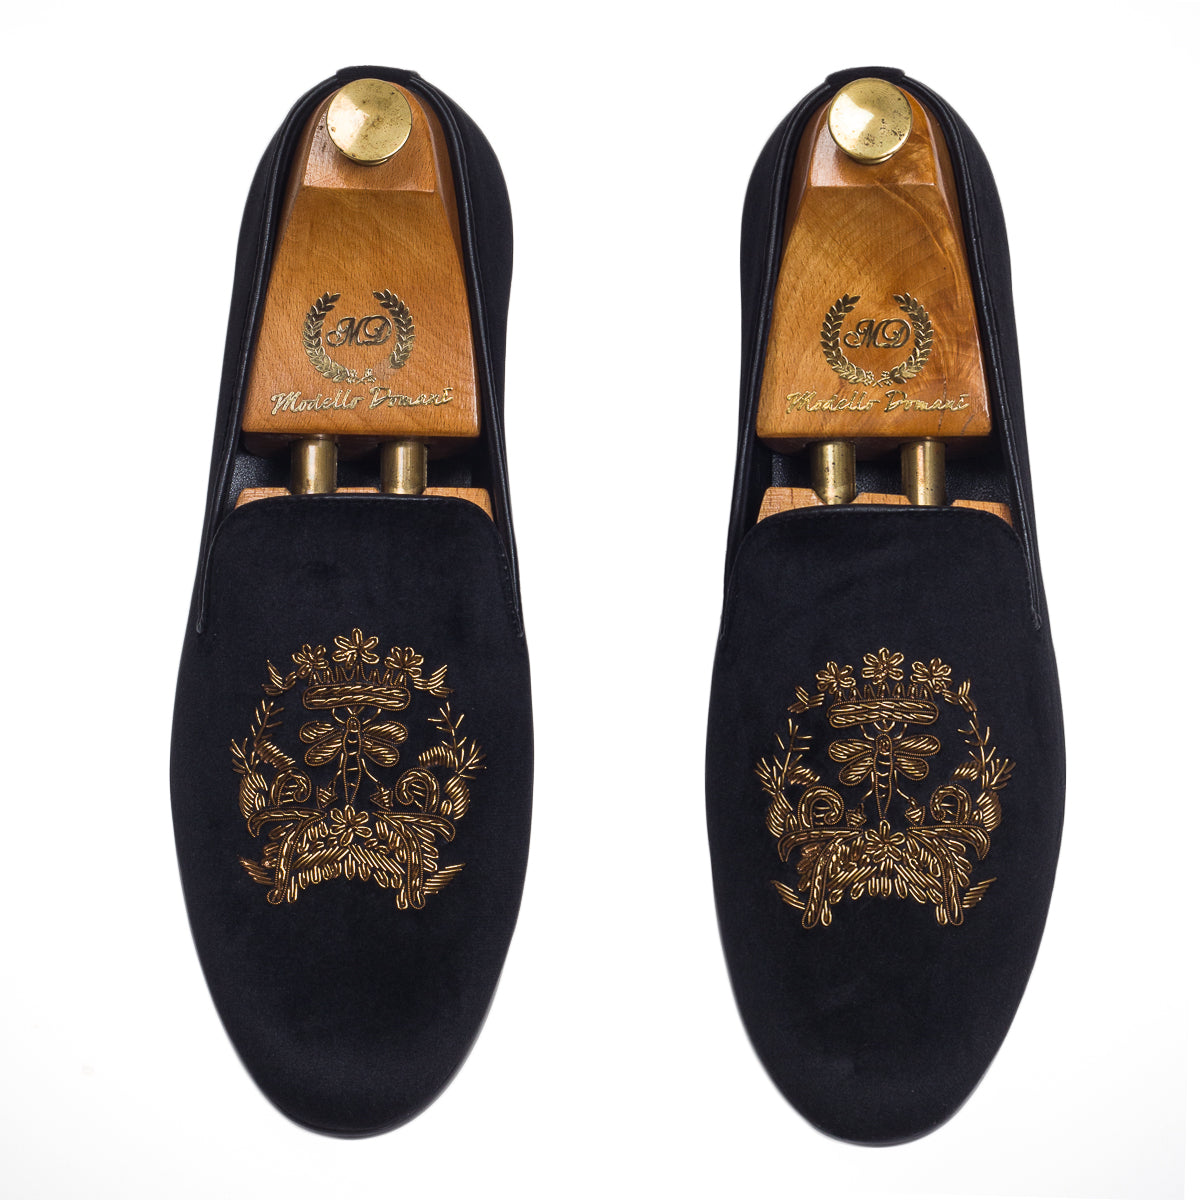 The Emperor Bee Slipons (Black - Limited Edition)